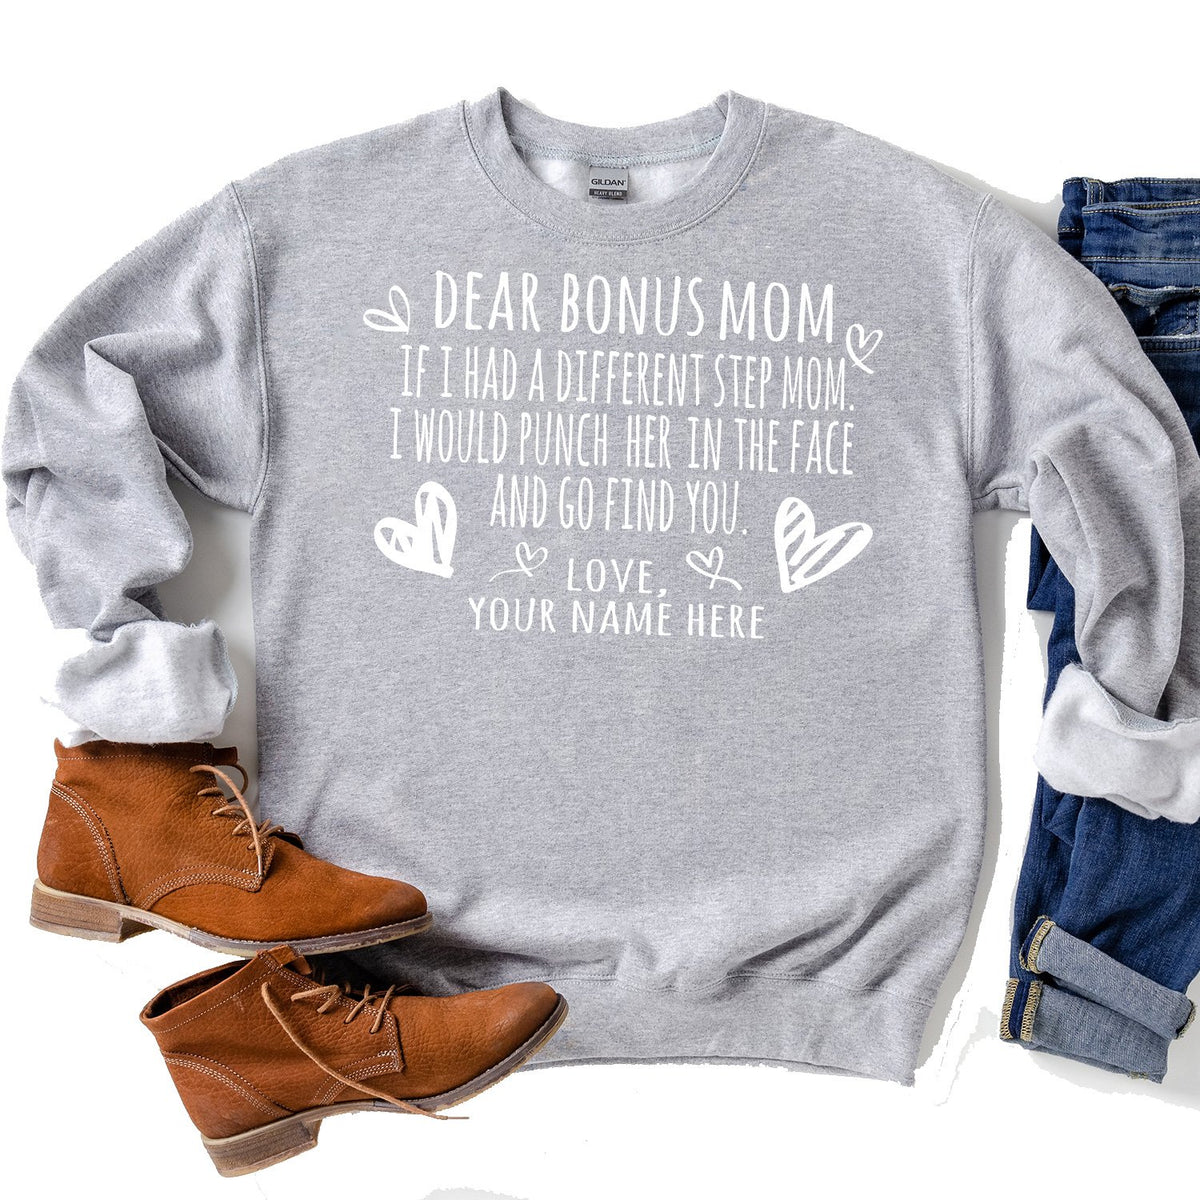 If I Had A Different Step Mom I Would Punch Her in The Face - Long Sleeve Heavy Crewneck Sweatshirt